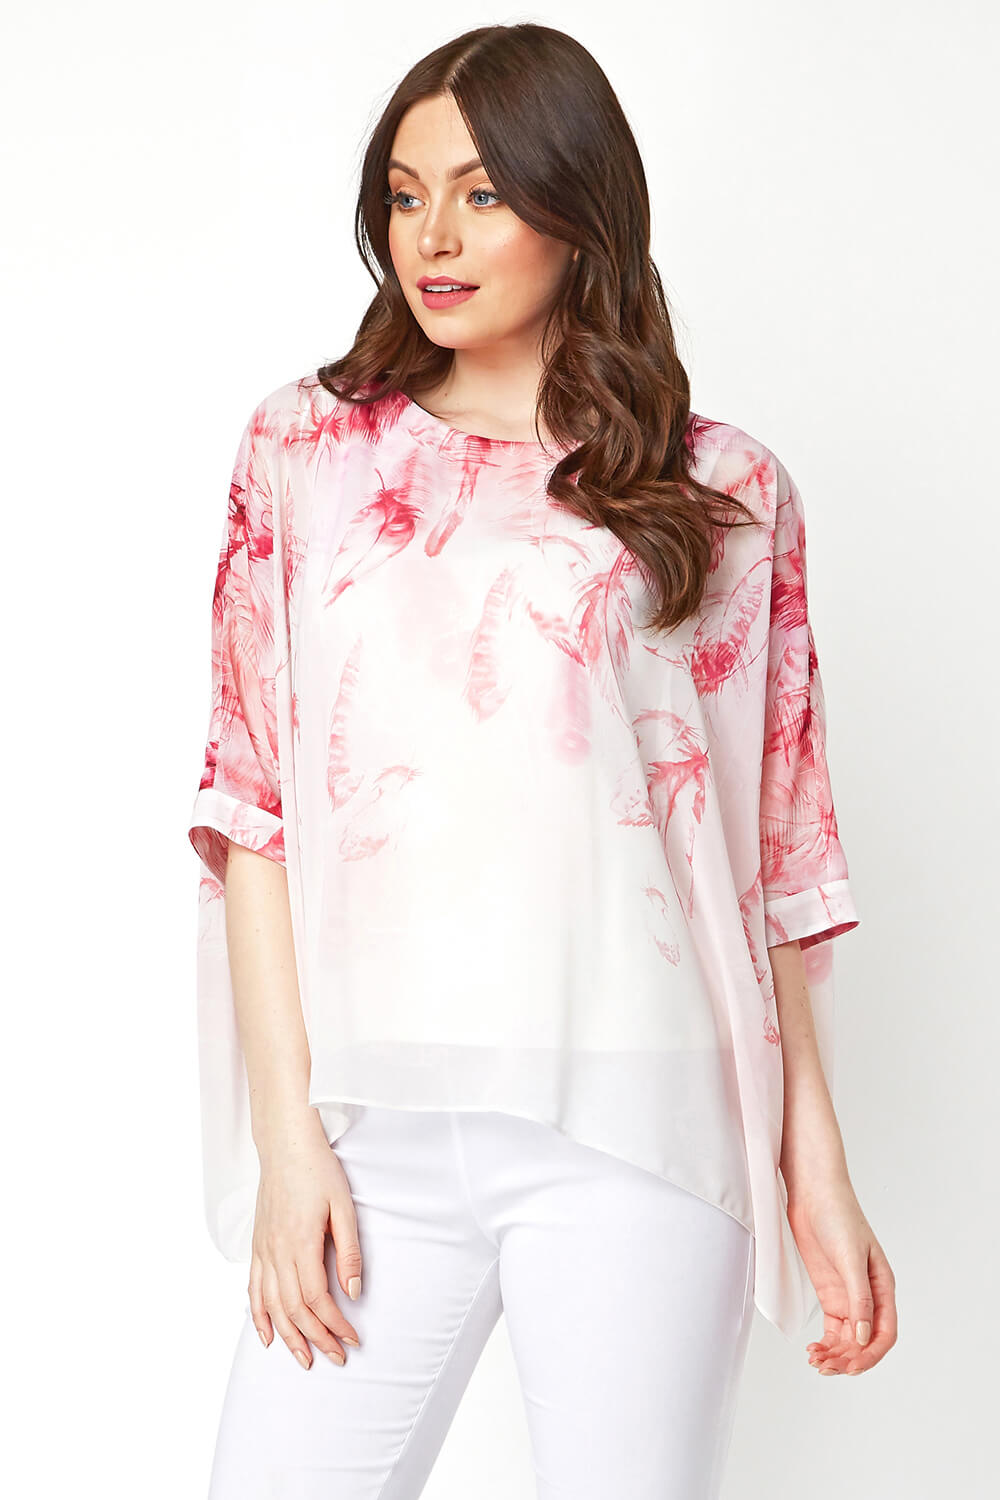 Feather Border Print Overlay Top